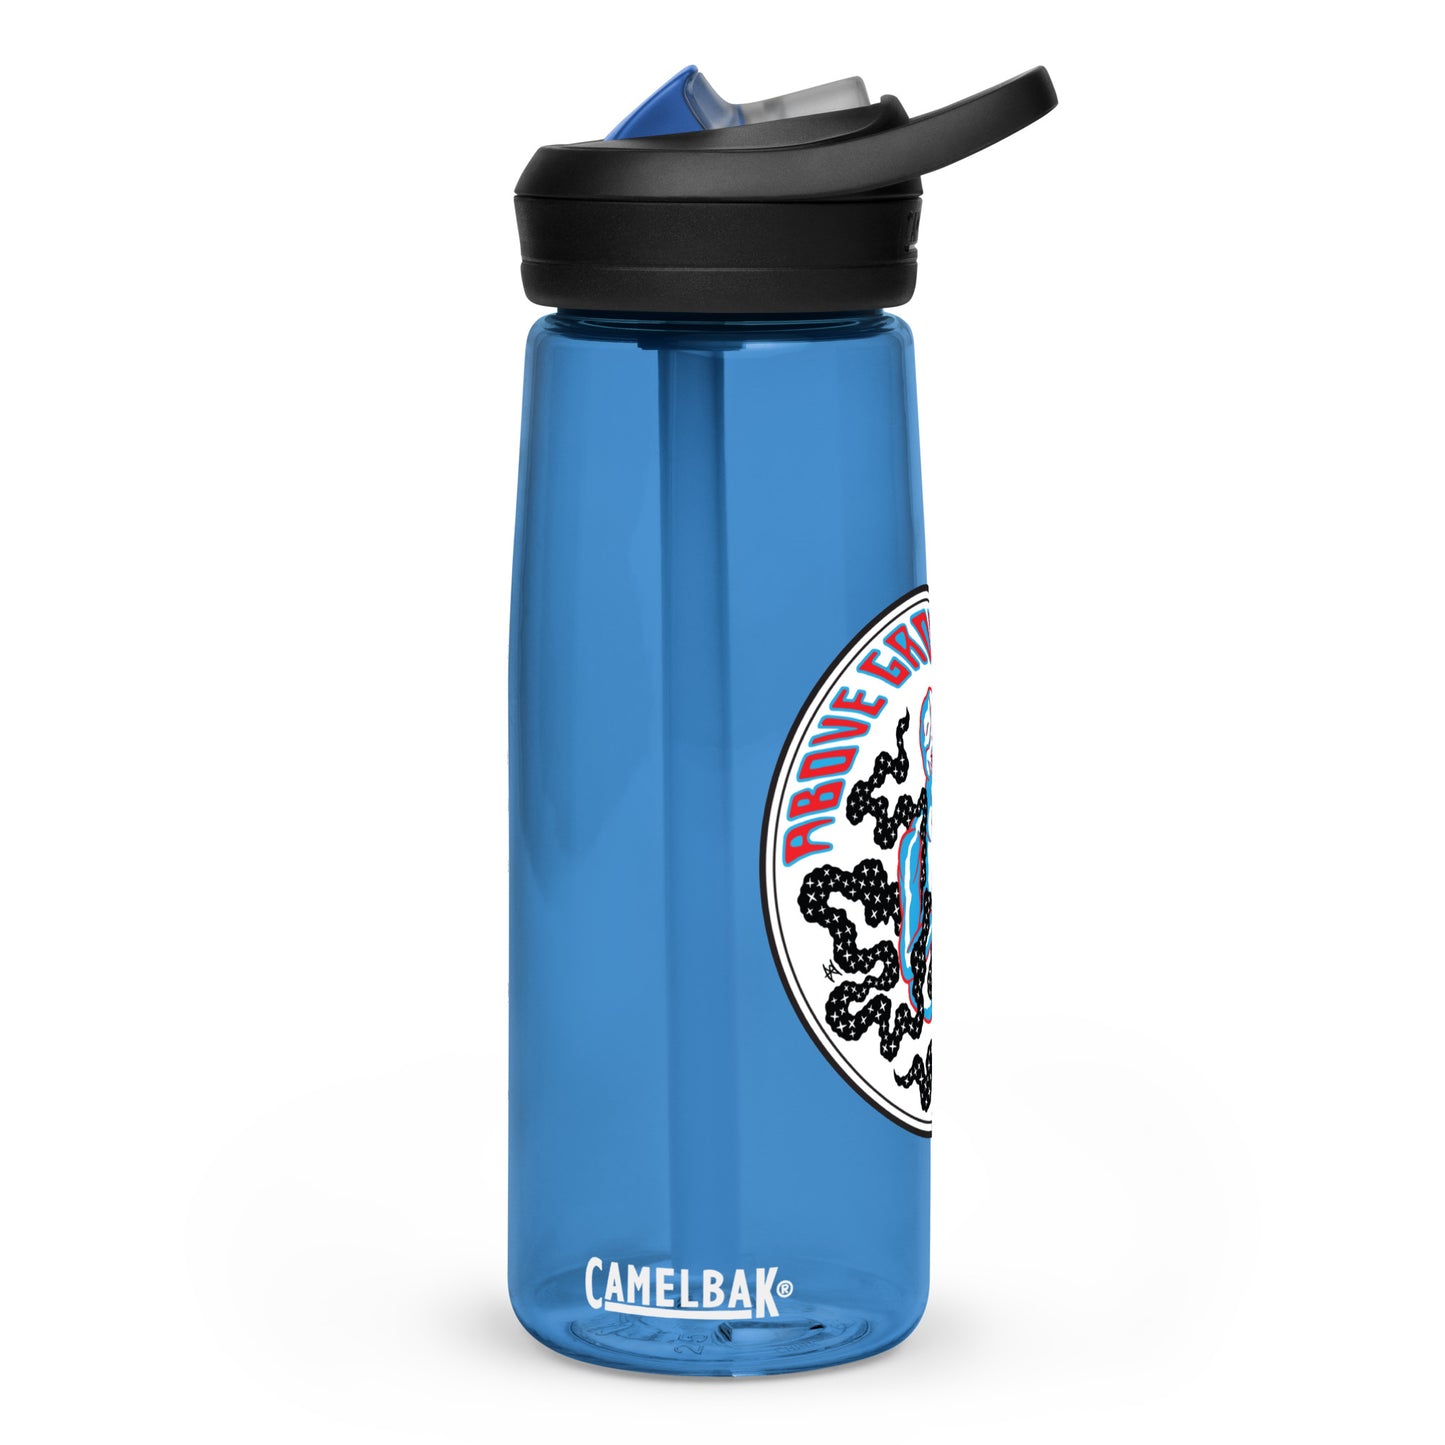 AGL Discs - Sports water bottle (with AGLien design by Ryan Koster)